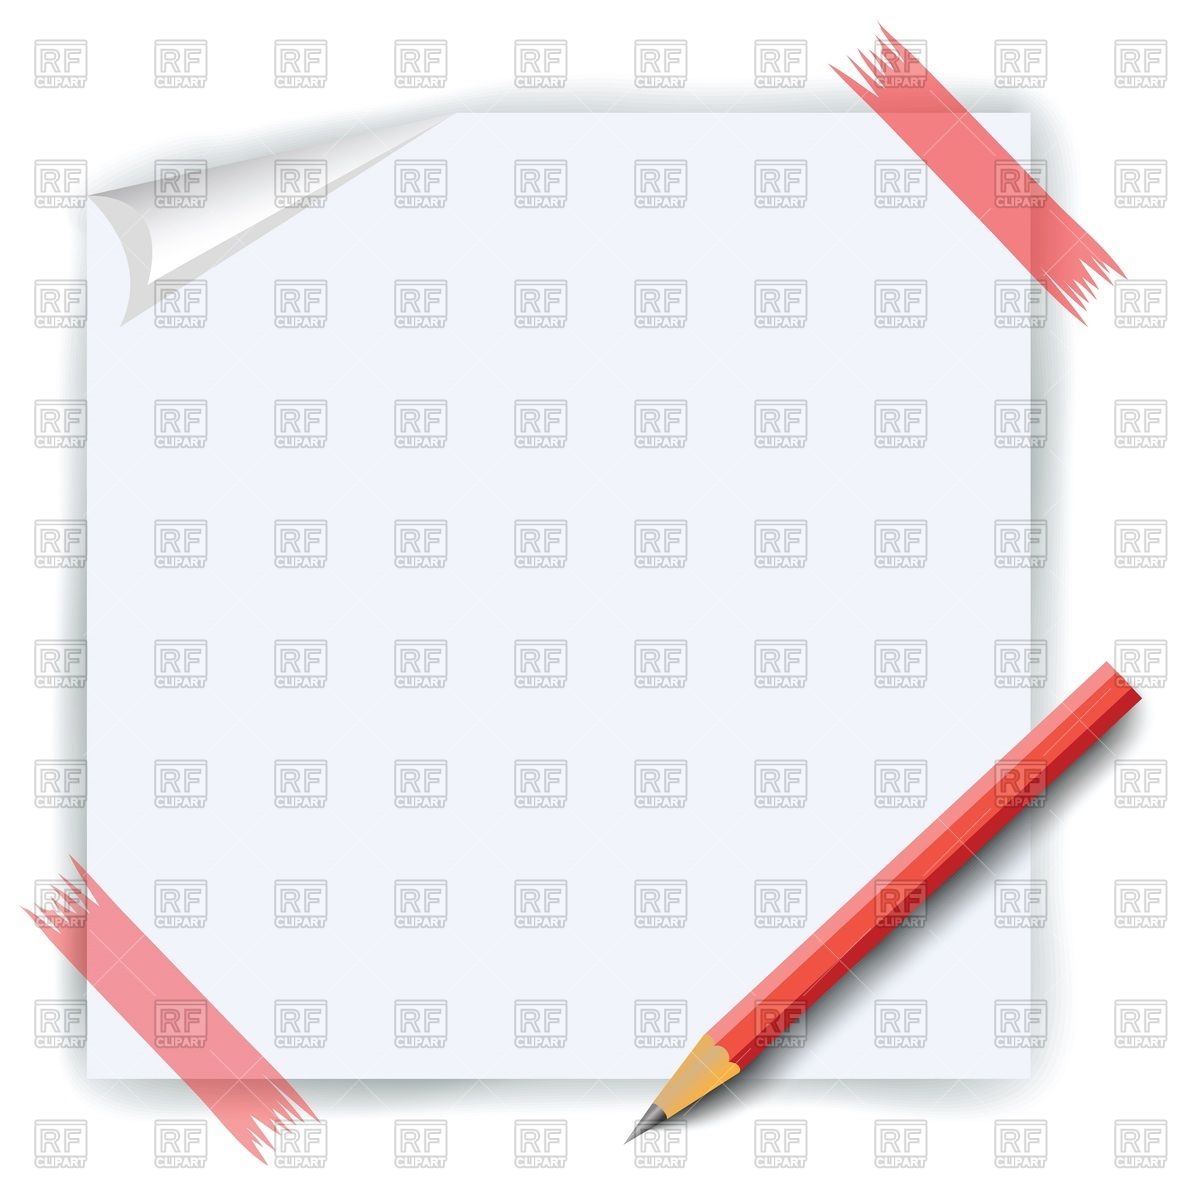     Sticky Tape And Pencil 39849 Download Royalty Free Vector Clipart